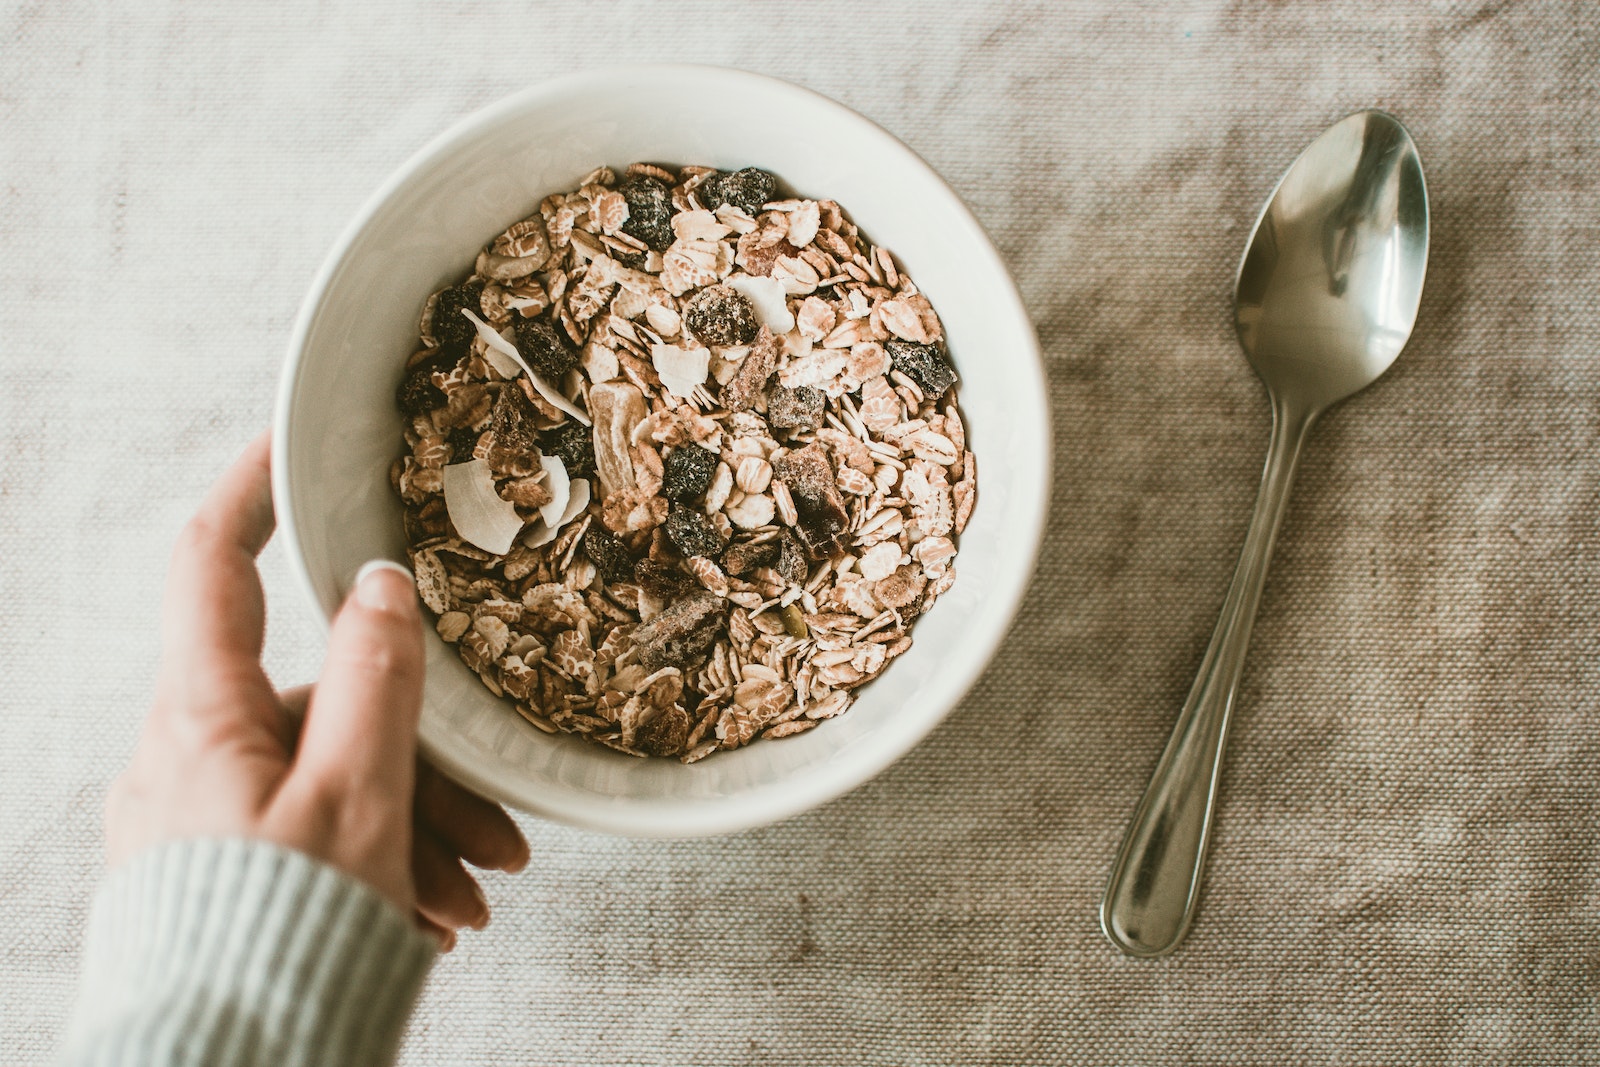 Person Holding Bowl Full of Oats